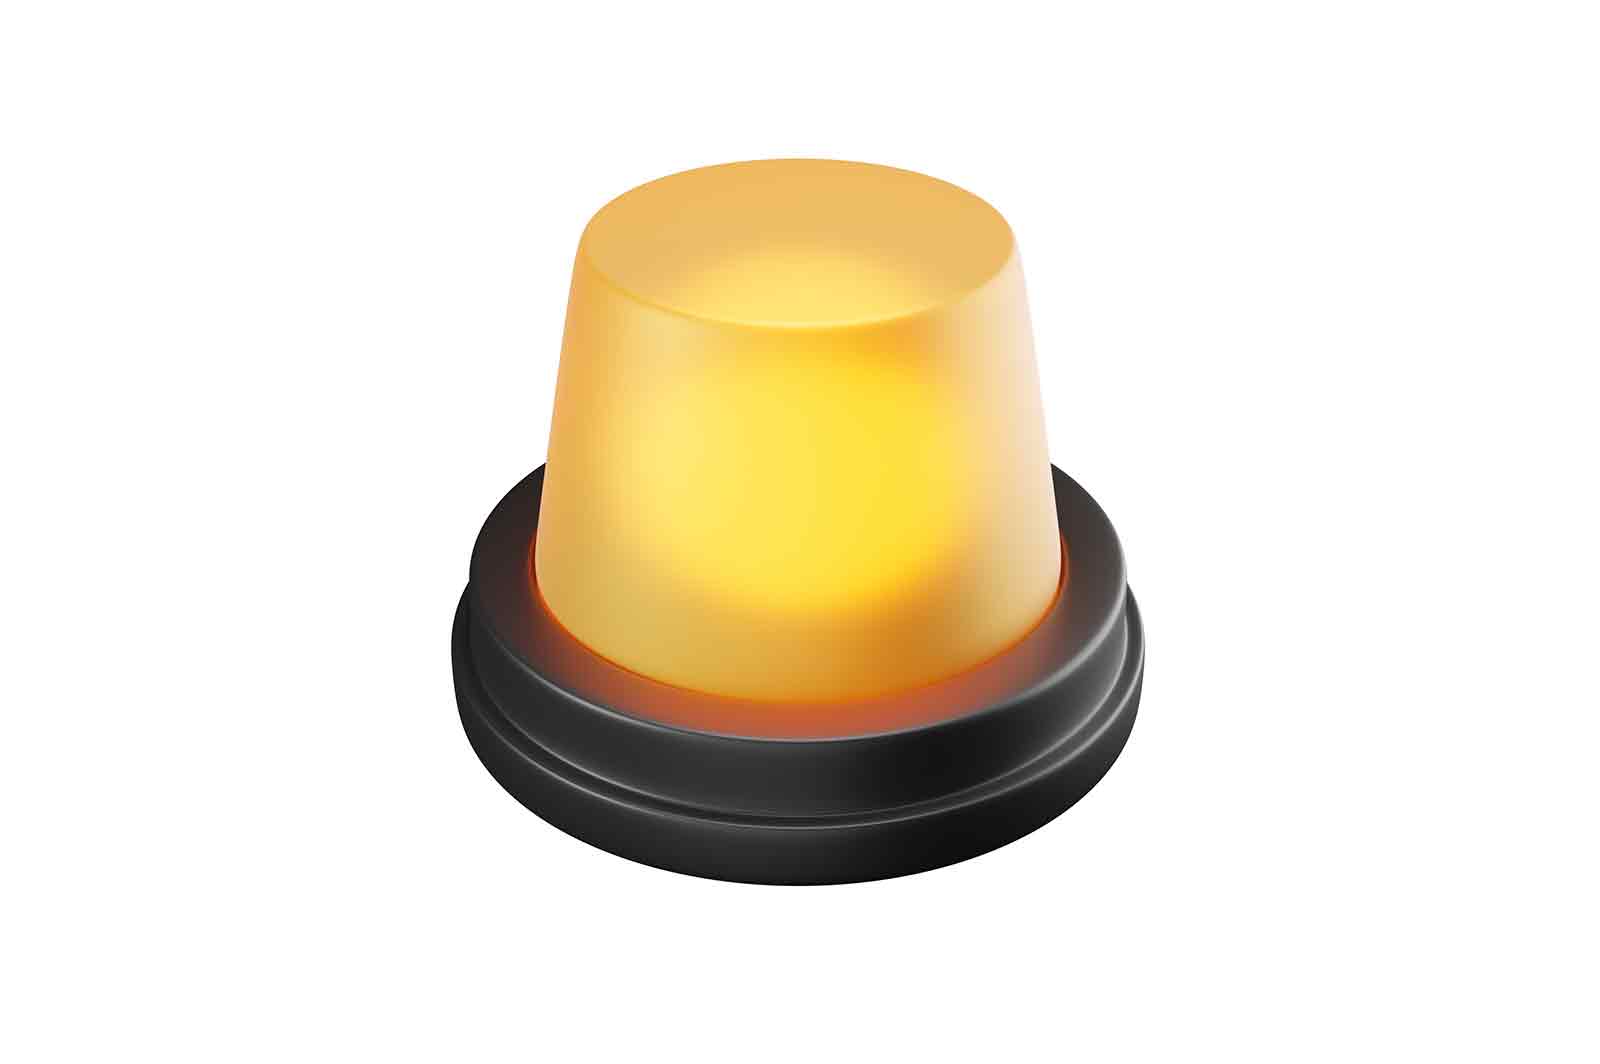 Yellow police light icon, danger hazard car top flashers 3d rendered illustration. Alarm lamp 3d isometric. Siren for emergency medical vehicles.